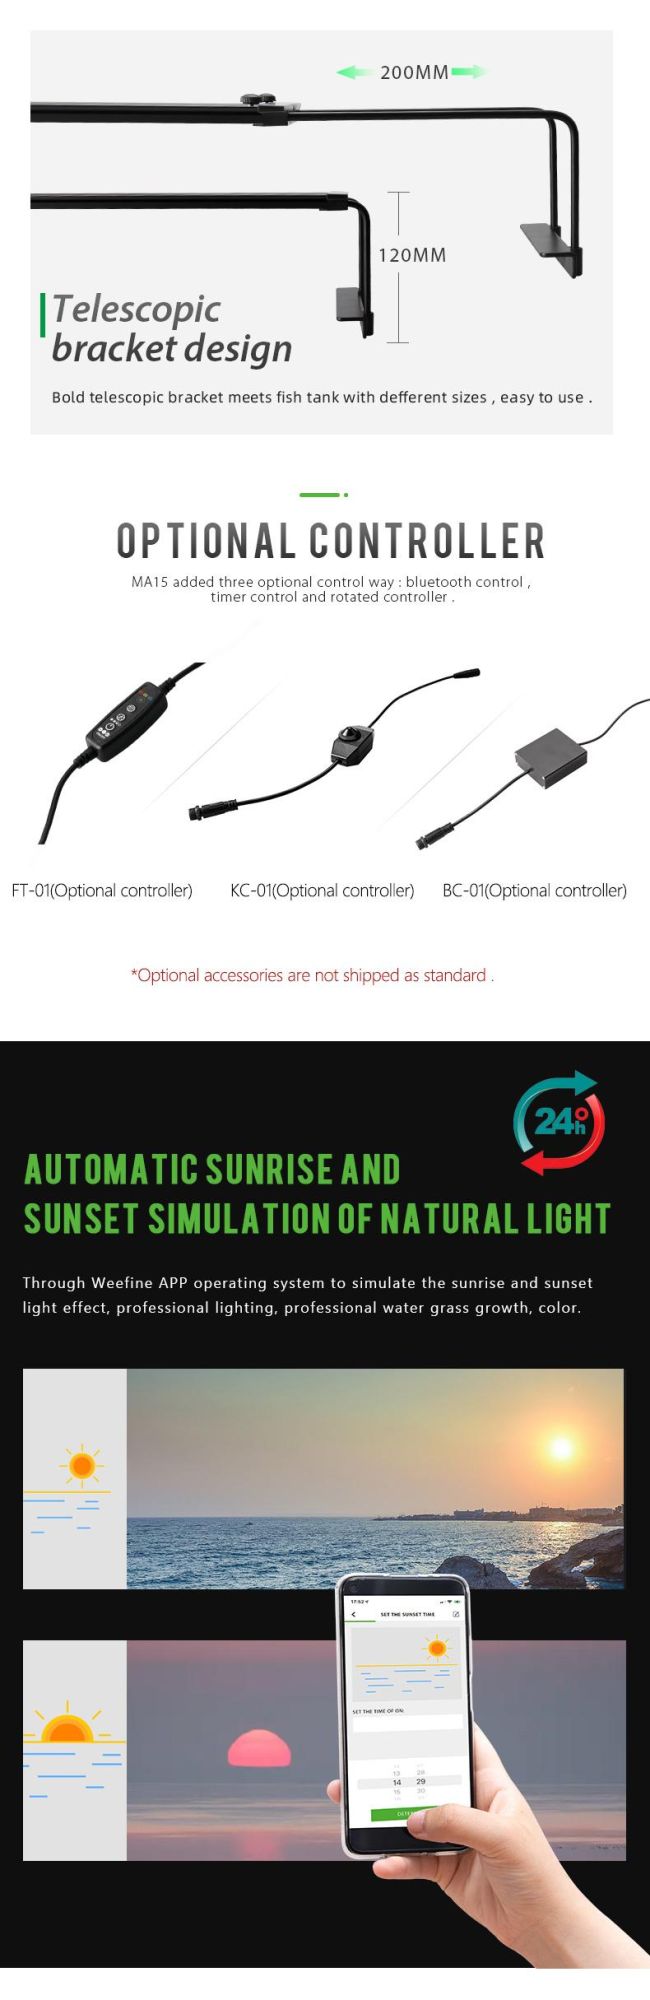 30W Programmable LED Aquarium Light for Coral Reef with Sunset and Sunrise Mode (MA15)